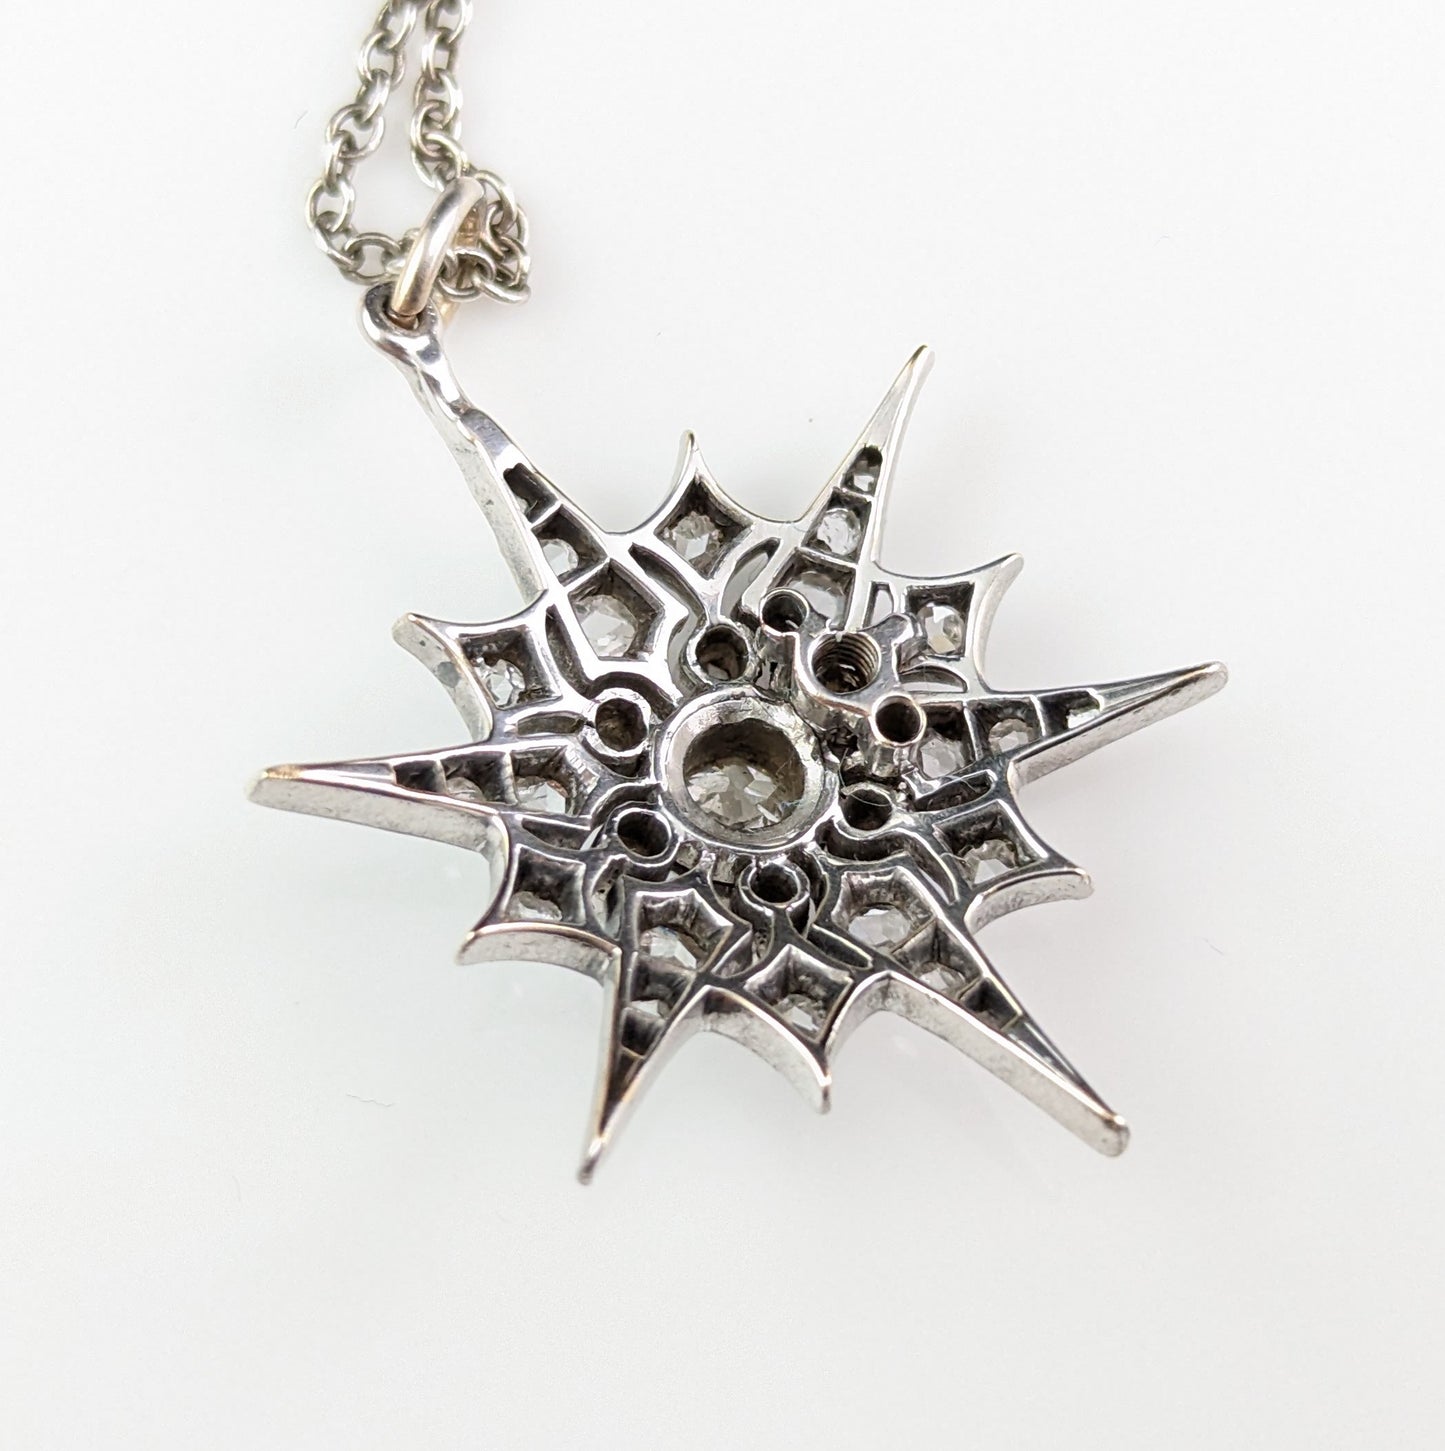 Antique Victorian Diamond Star pendant, Silver on gold, necklace